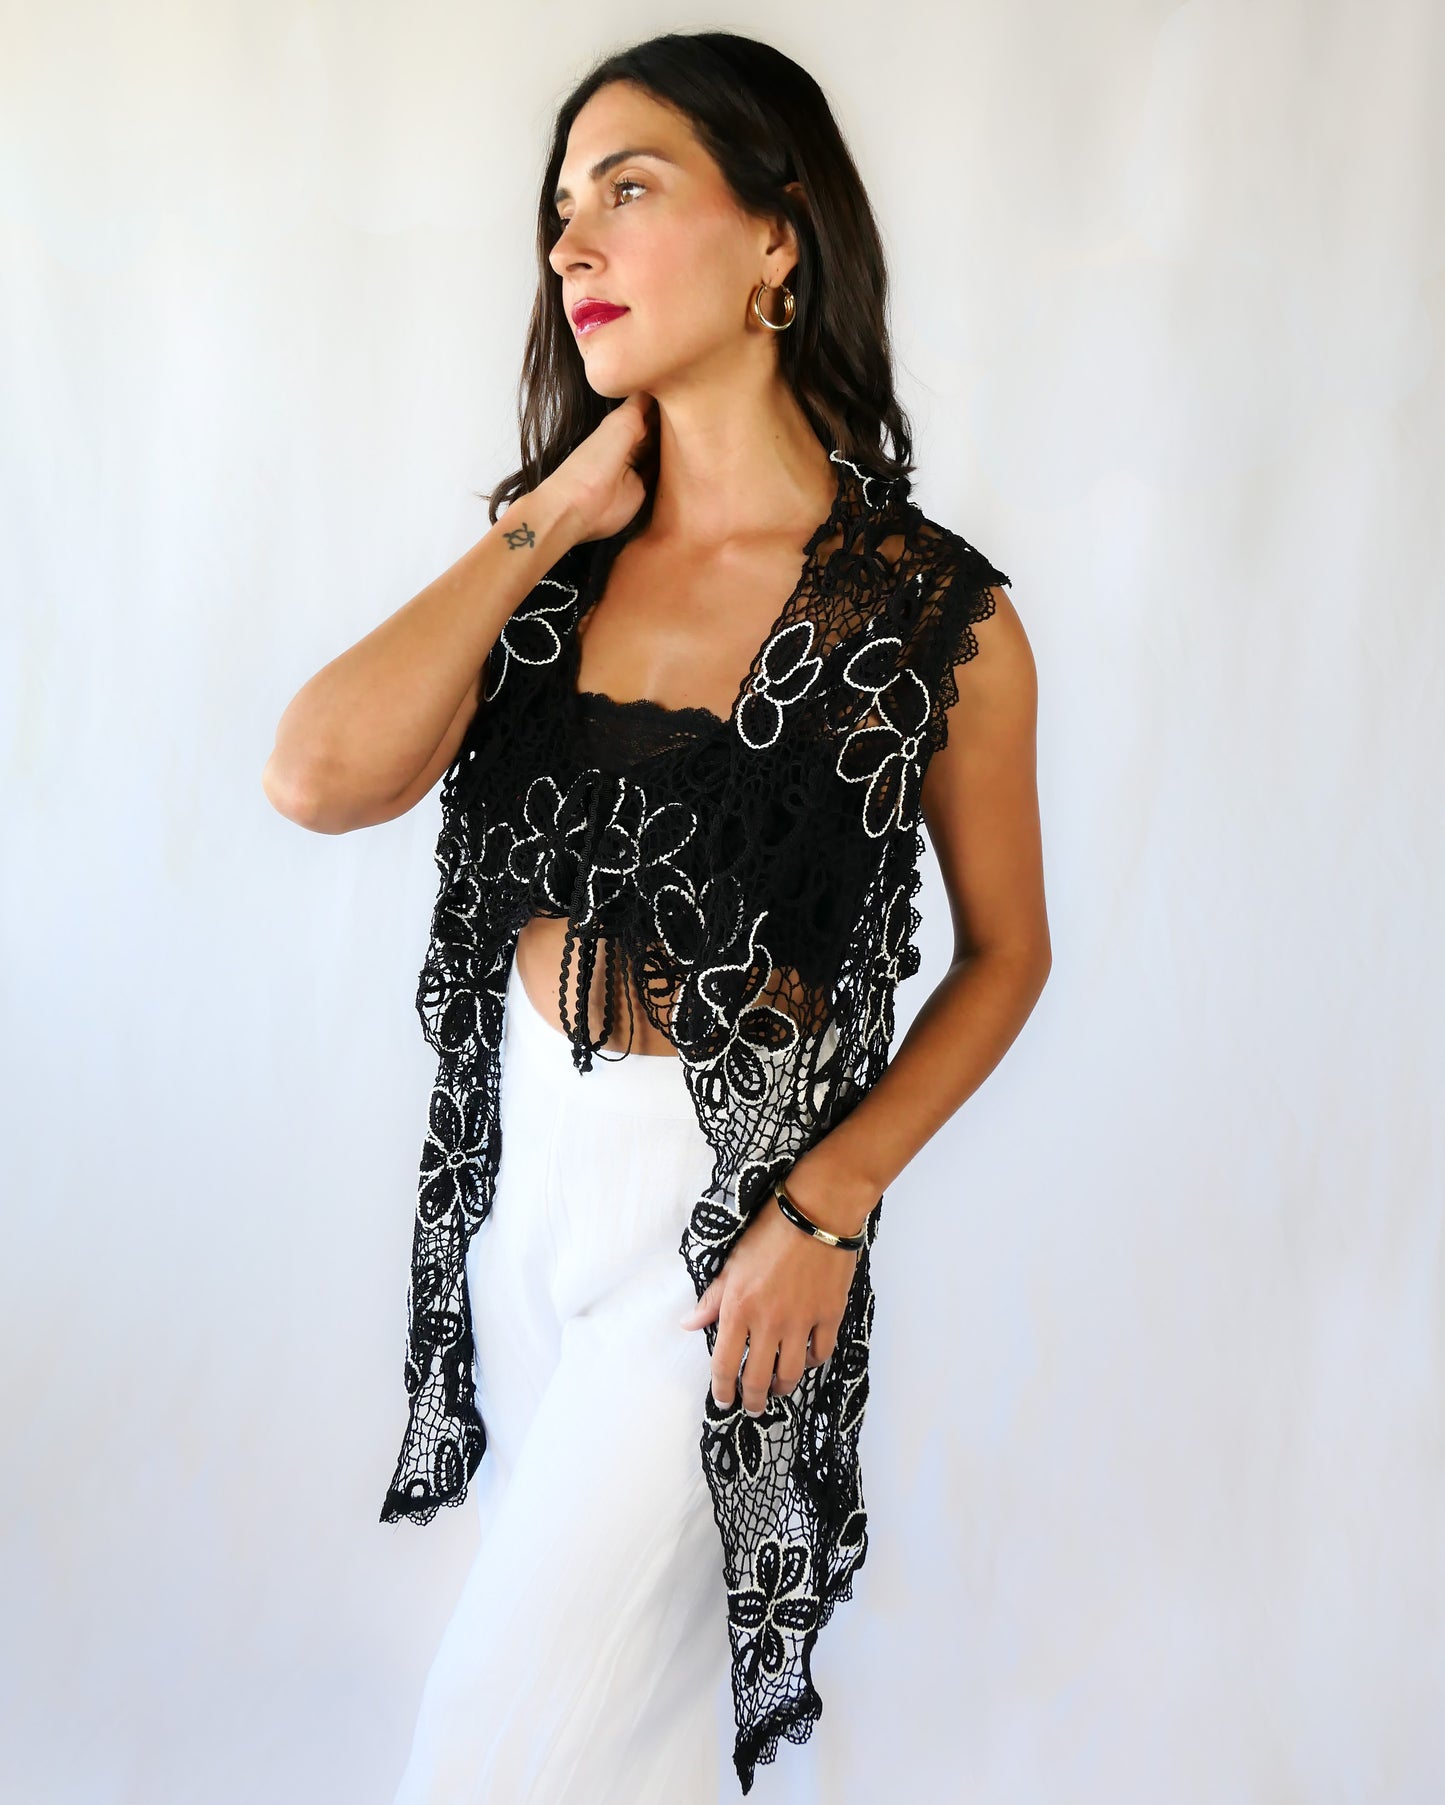 A One Size tie-up hand crocheted long vest with a playful black and white daisy flower motif throughout. Pair it with a strapless bikini bra, a pair of wide-leg trousers, and heels or sandals depending on your mood.  Made with original Lim's Vintage crochet fabric. 